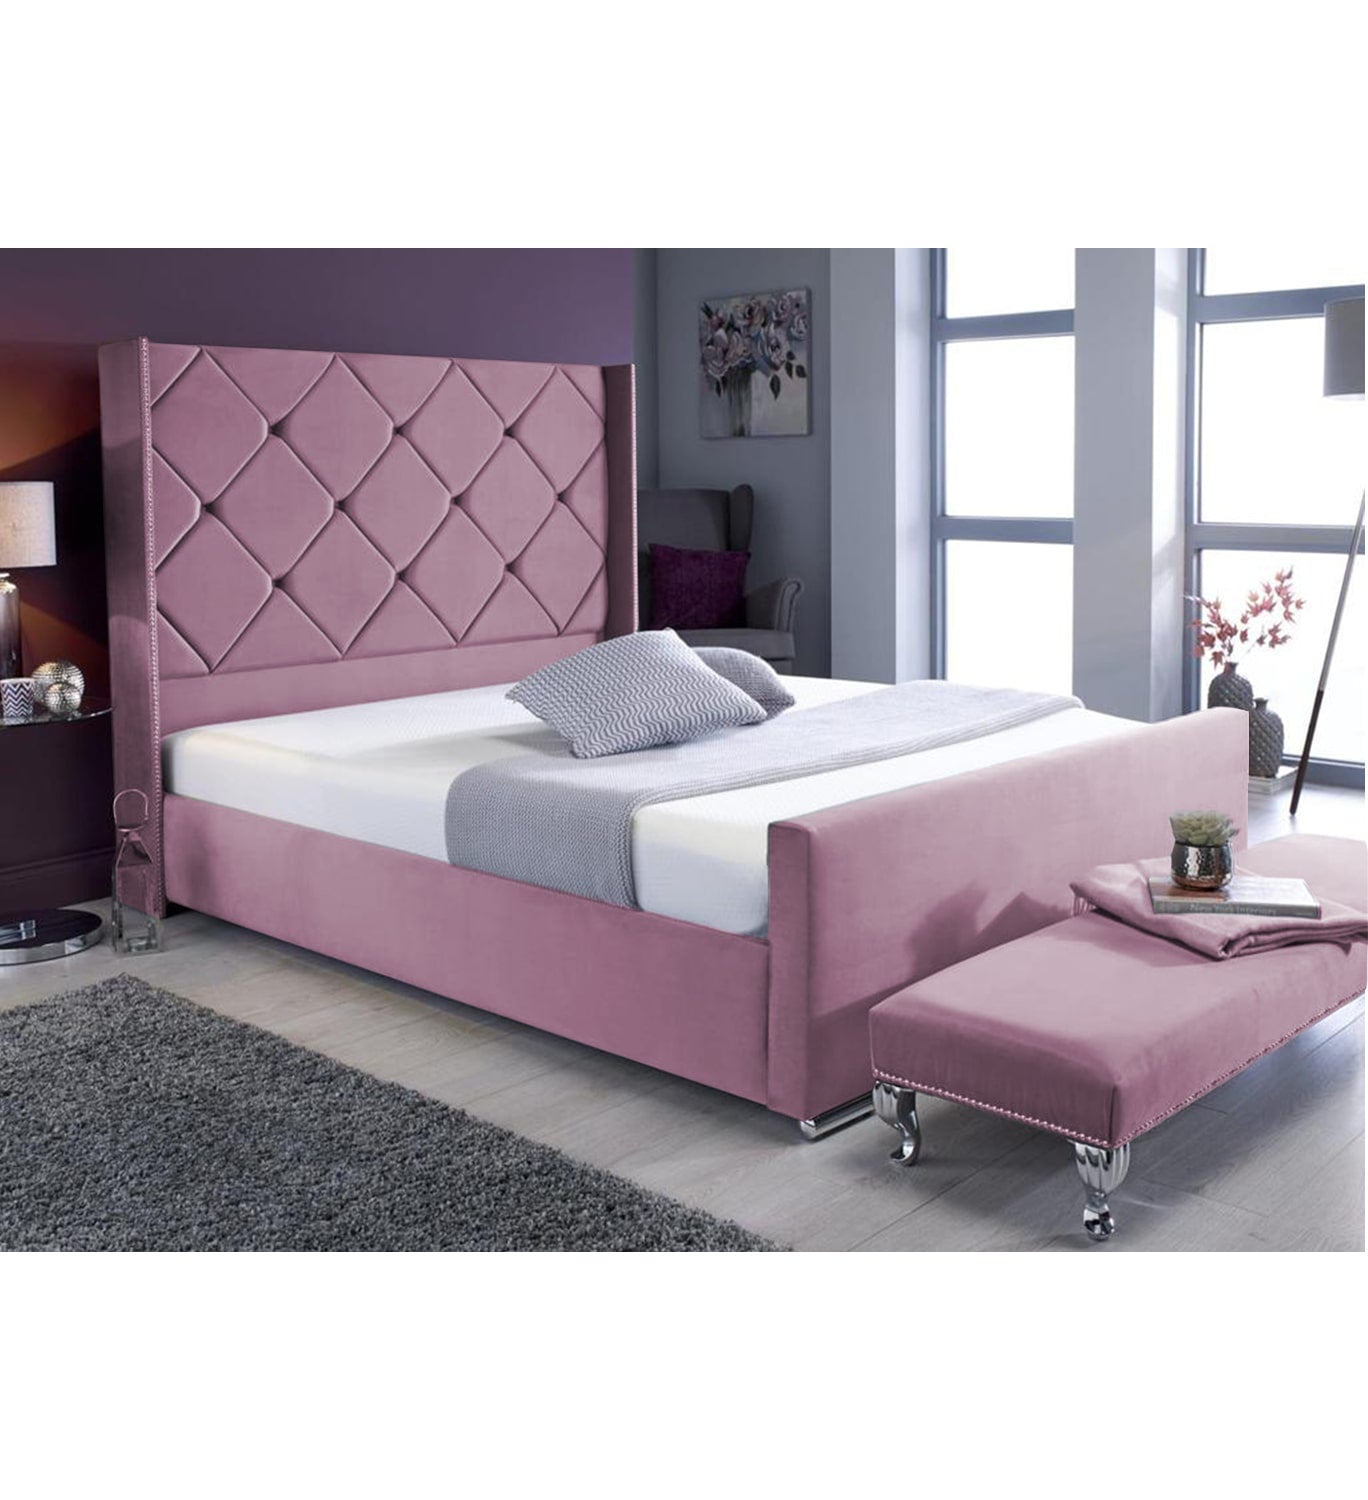 Chelse Upholstered Bed Frame with Ottoman Storage Options Britainsleep